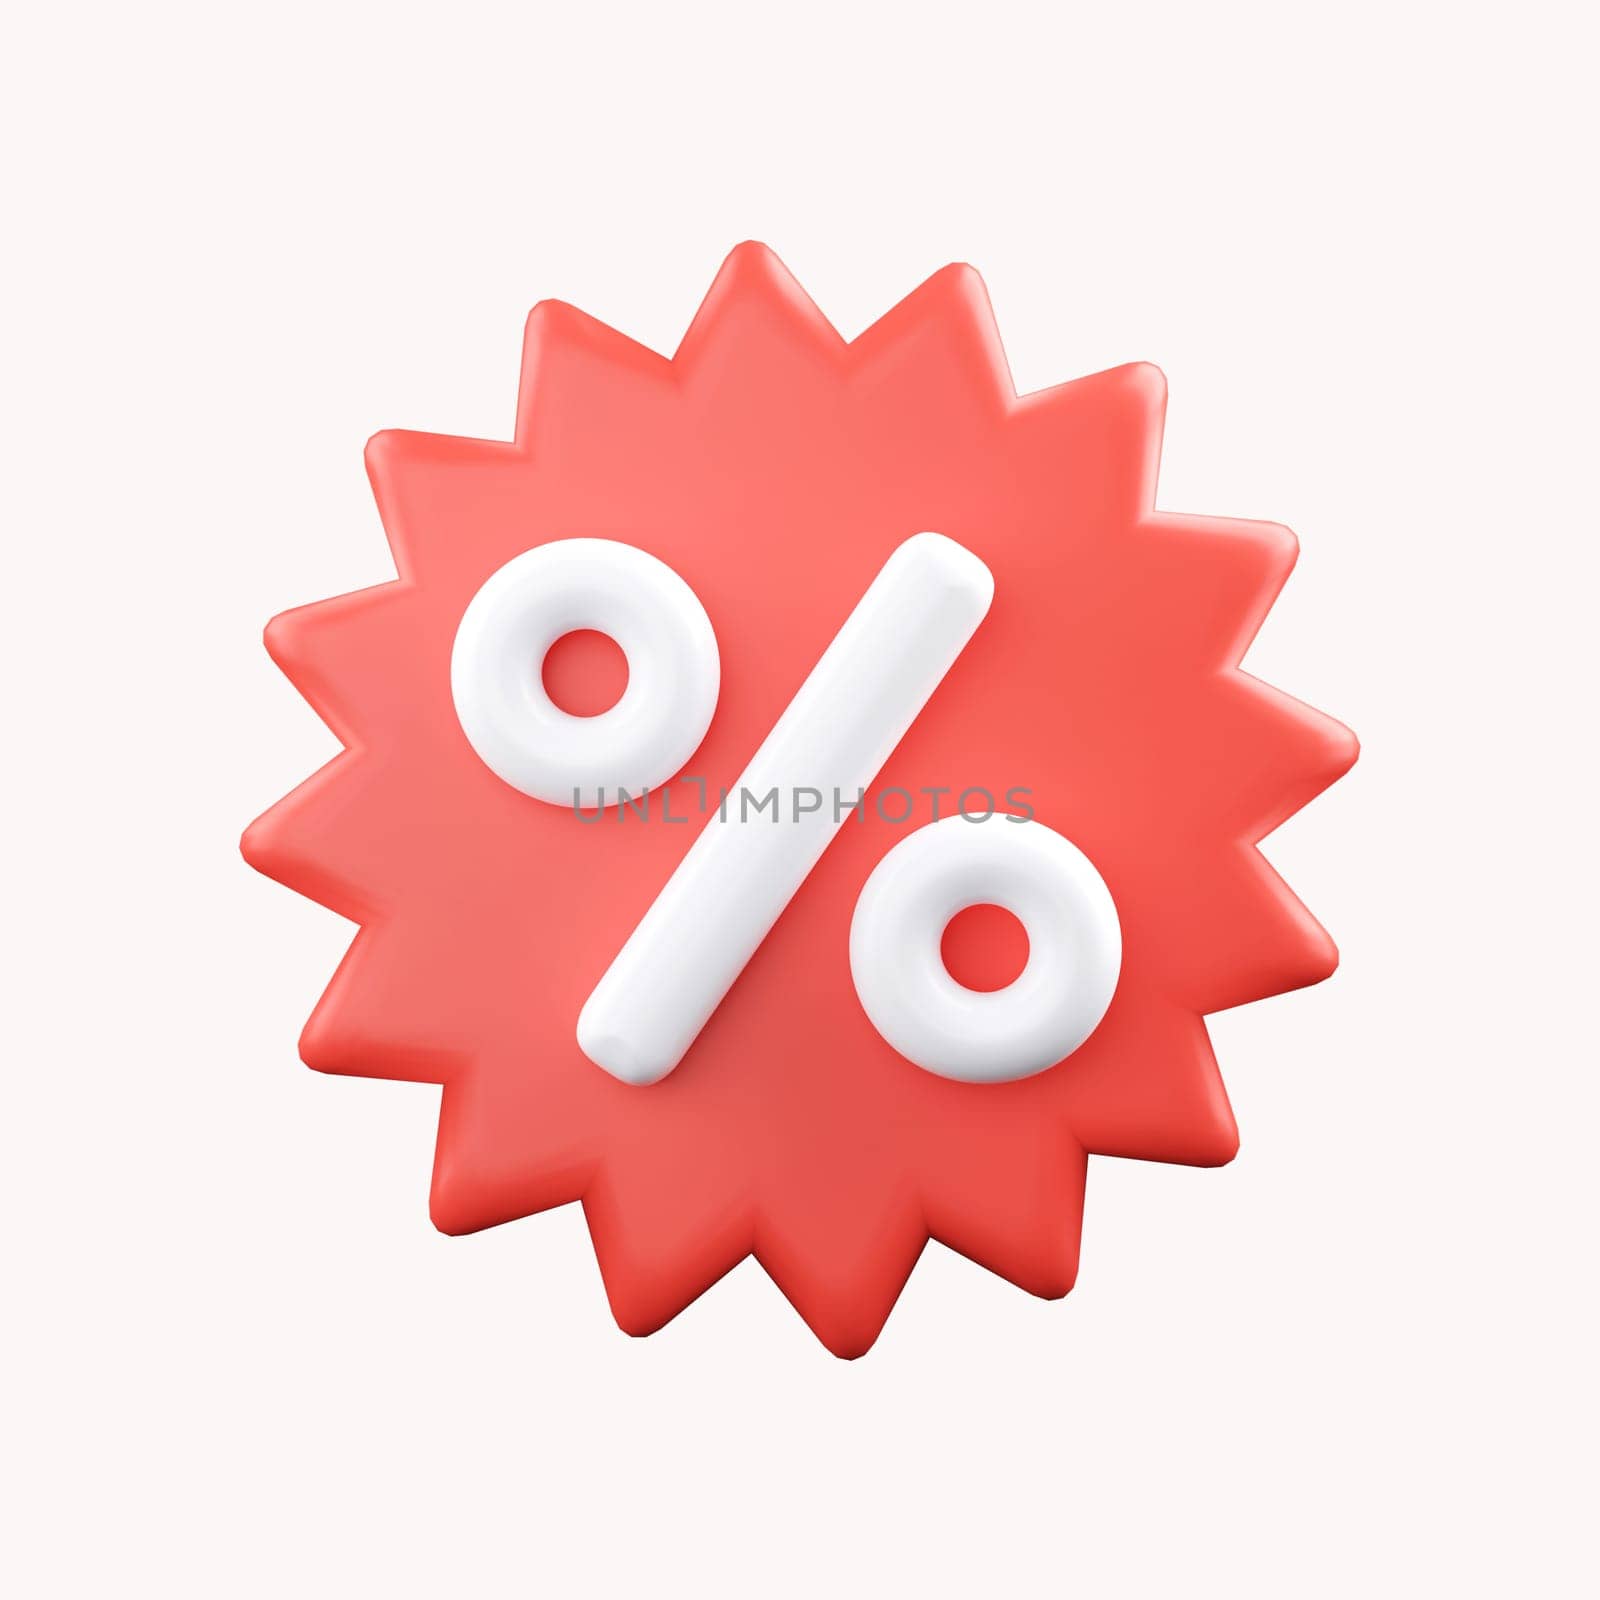 3d Promotion sale percentage discount coupons on isolate background marketing profitable shopping online concept. cashback, purchase, sell, minimal cartoon. 3d render illustration.